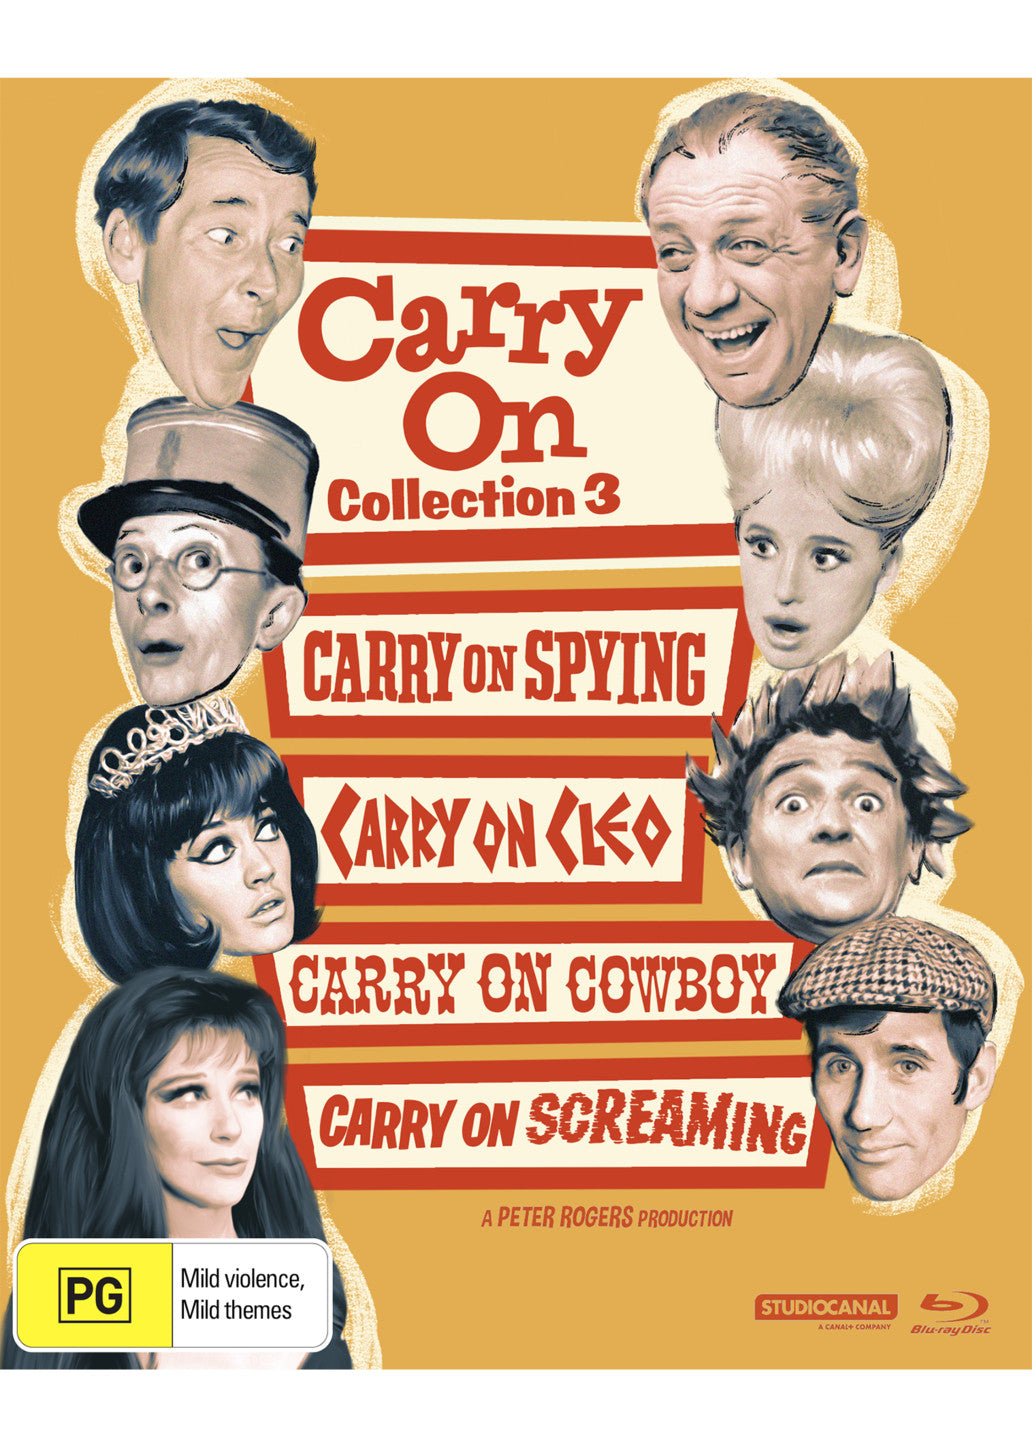 CARRY ON COLLECTION 3: CARRY ON SPYING / CARRY ON CLEO / CARRY ON COWBOY / CARRY ON SCREAMING! - LIMITED BOOKLET EDITION BLU-RAY